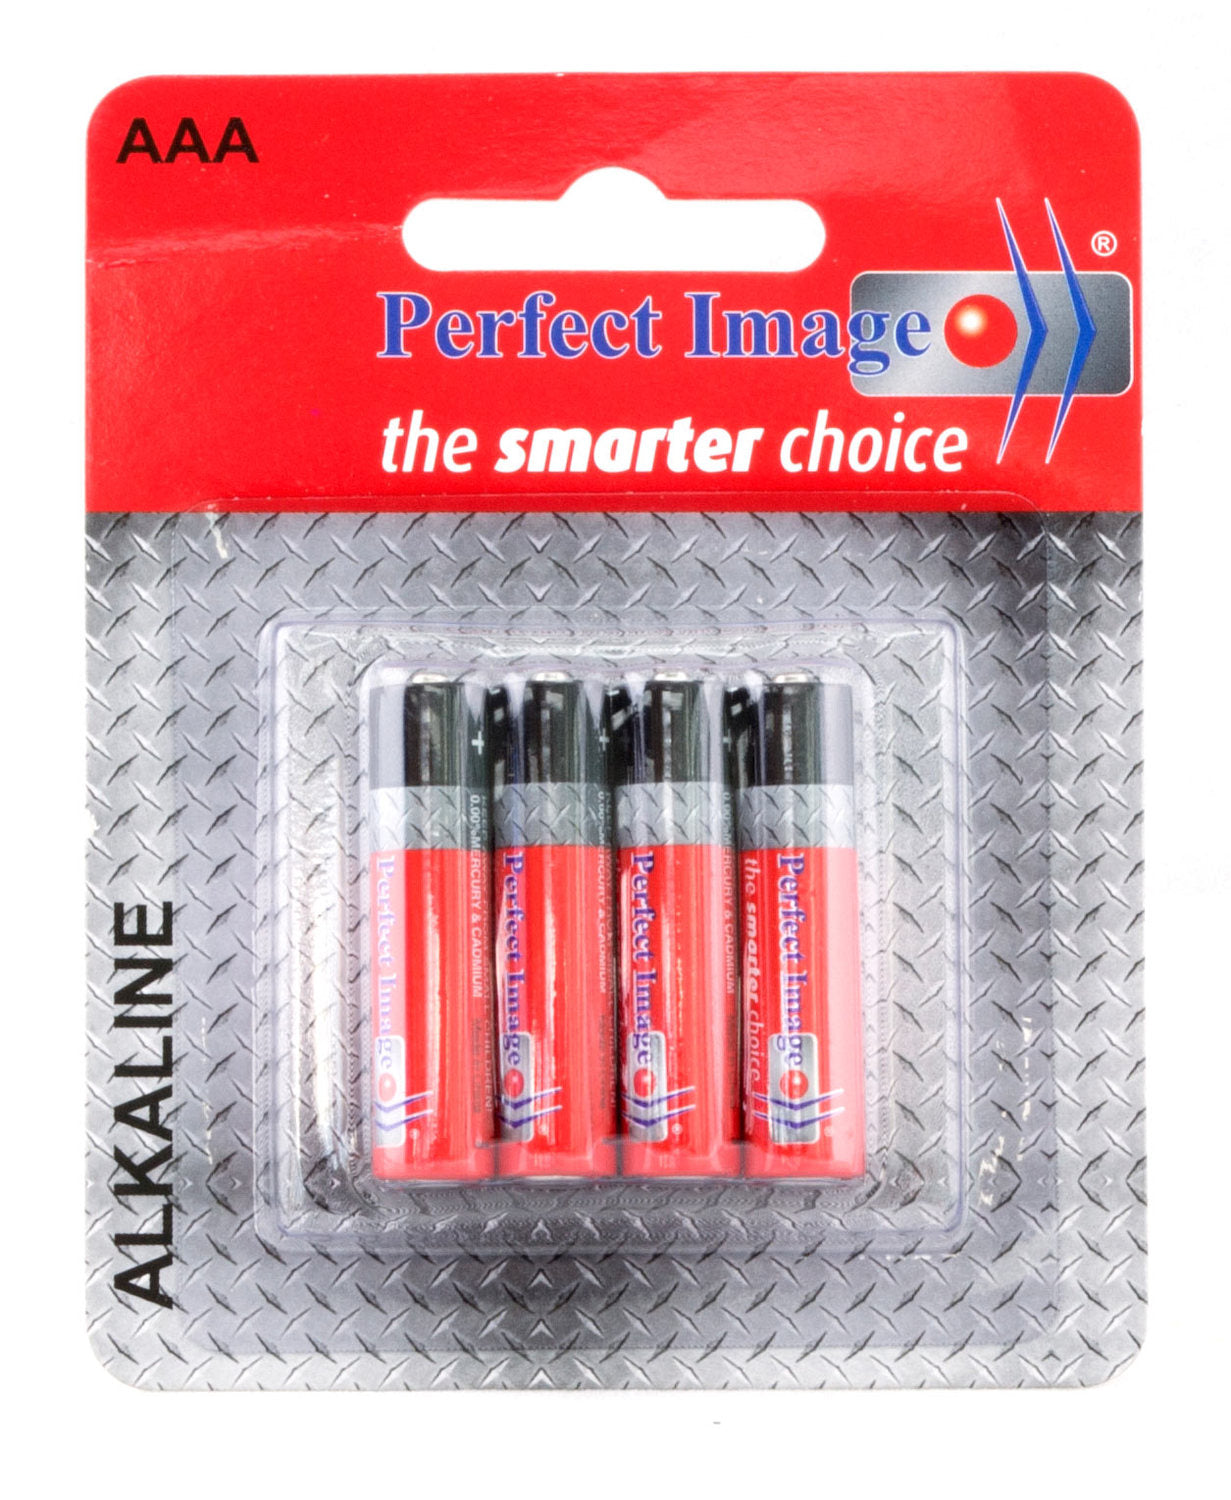 Perfect Image Batteries - AAA, AA, C, D sizes